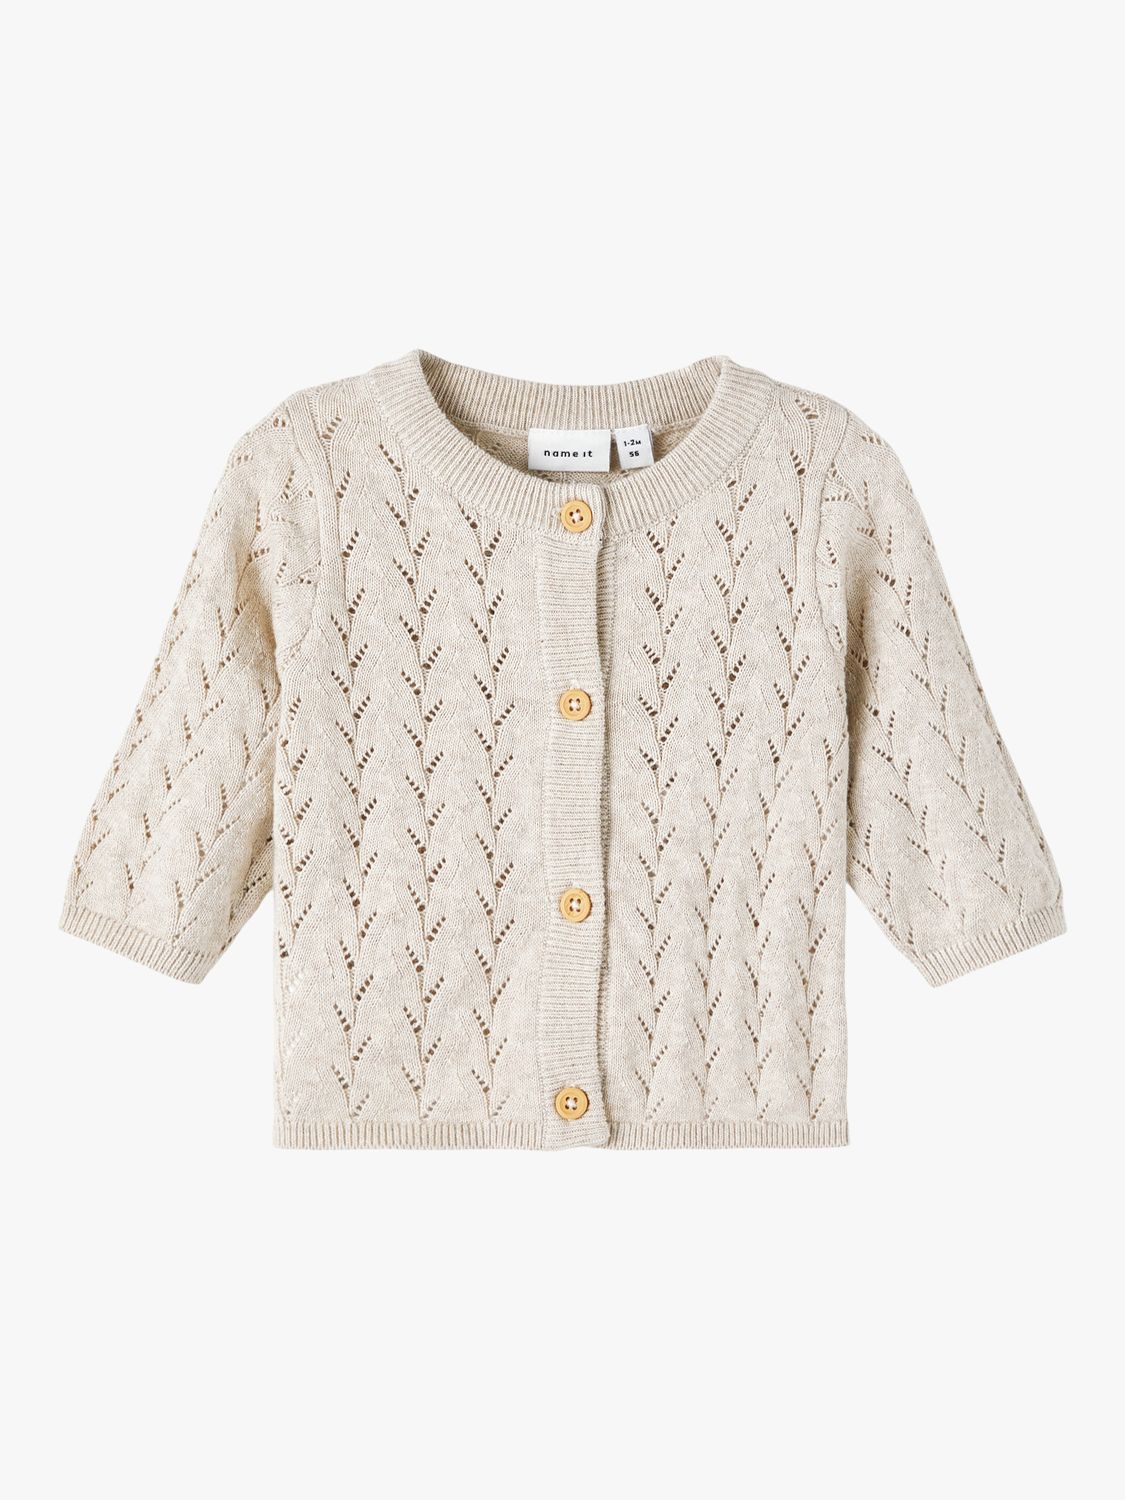 NAME IT Baby Organic Cotton Textured Knitted Cardigan